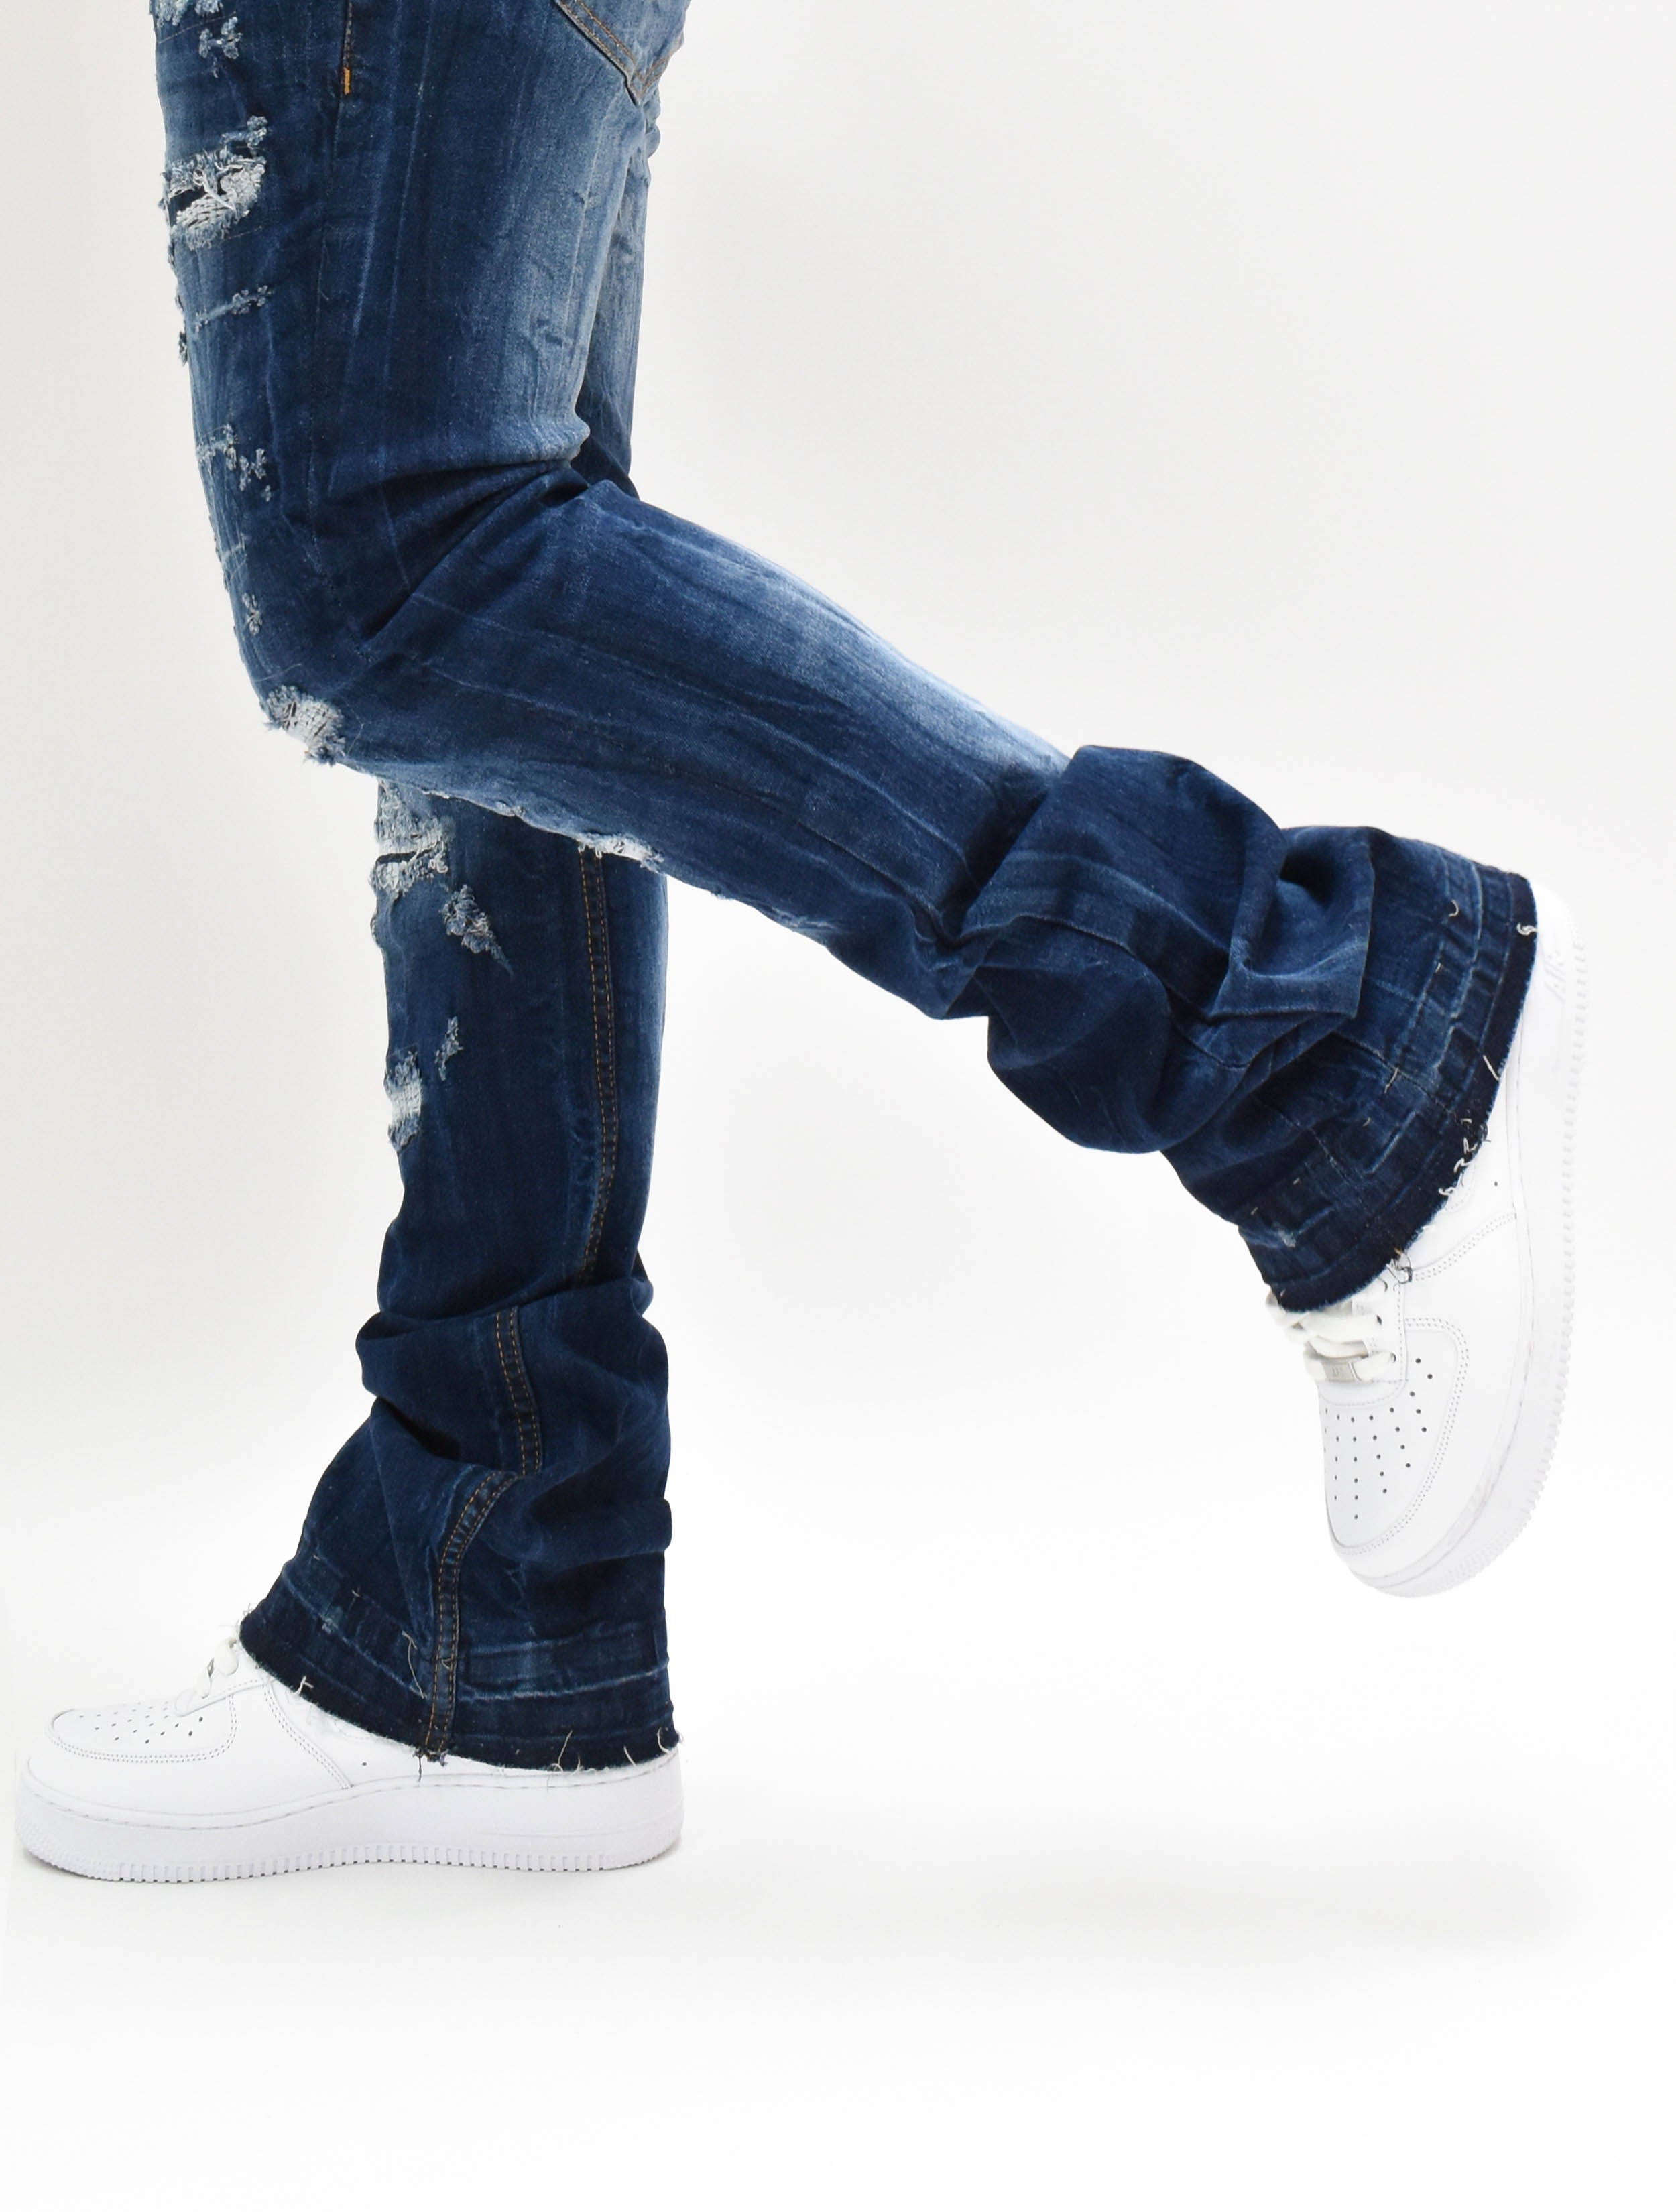 FW33893 Distressed Stacked Denim